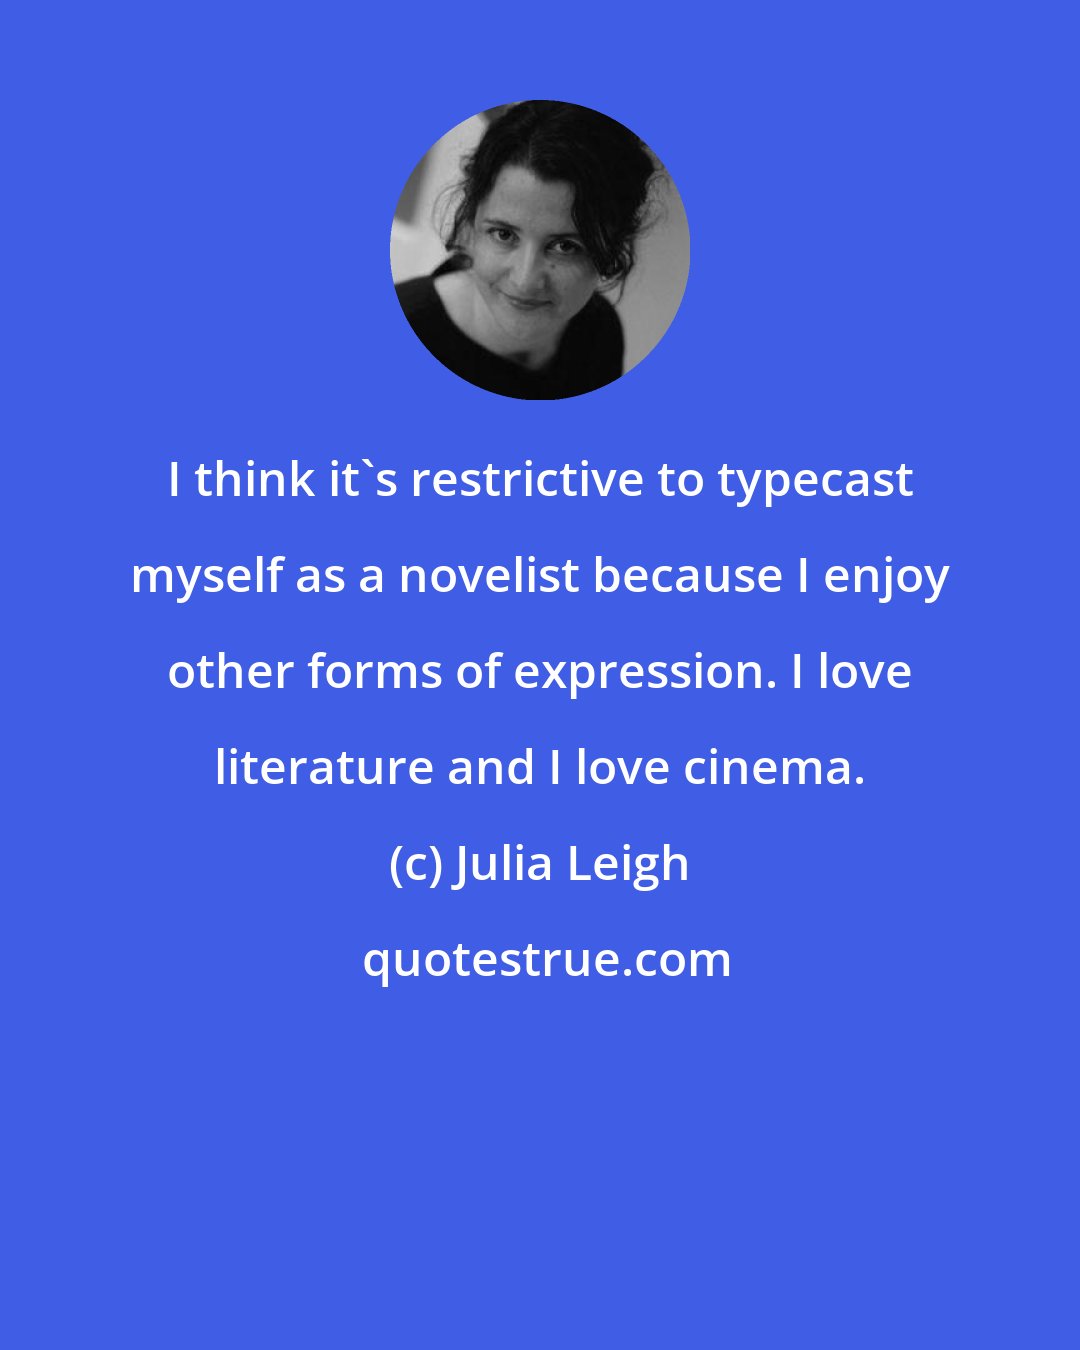 Julia Leigh: I think it's restrictive to typecast myself as a novelist because I enjoy other forms of expression. I love literature and I love cinema.